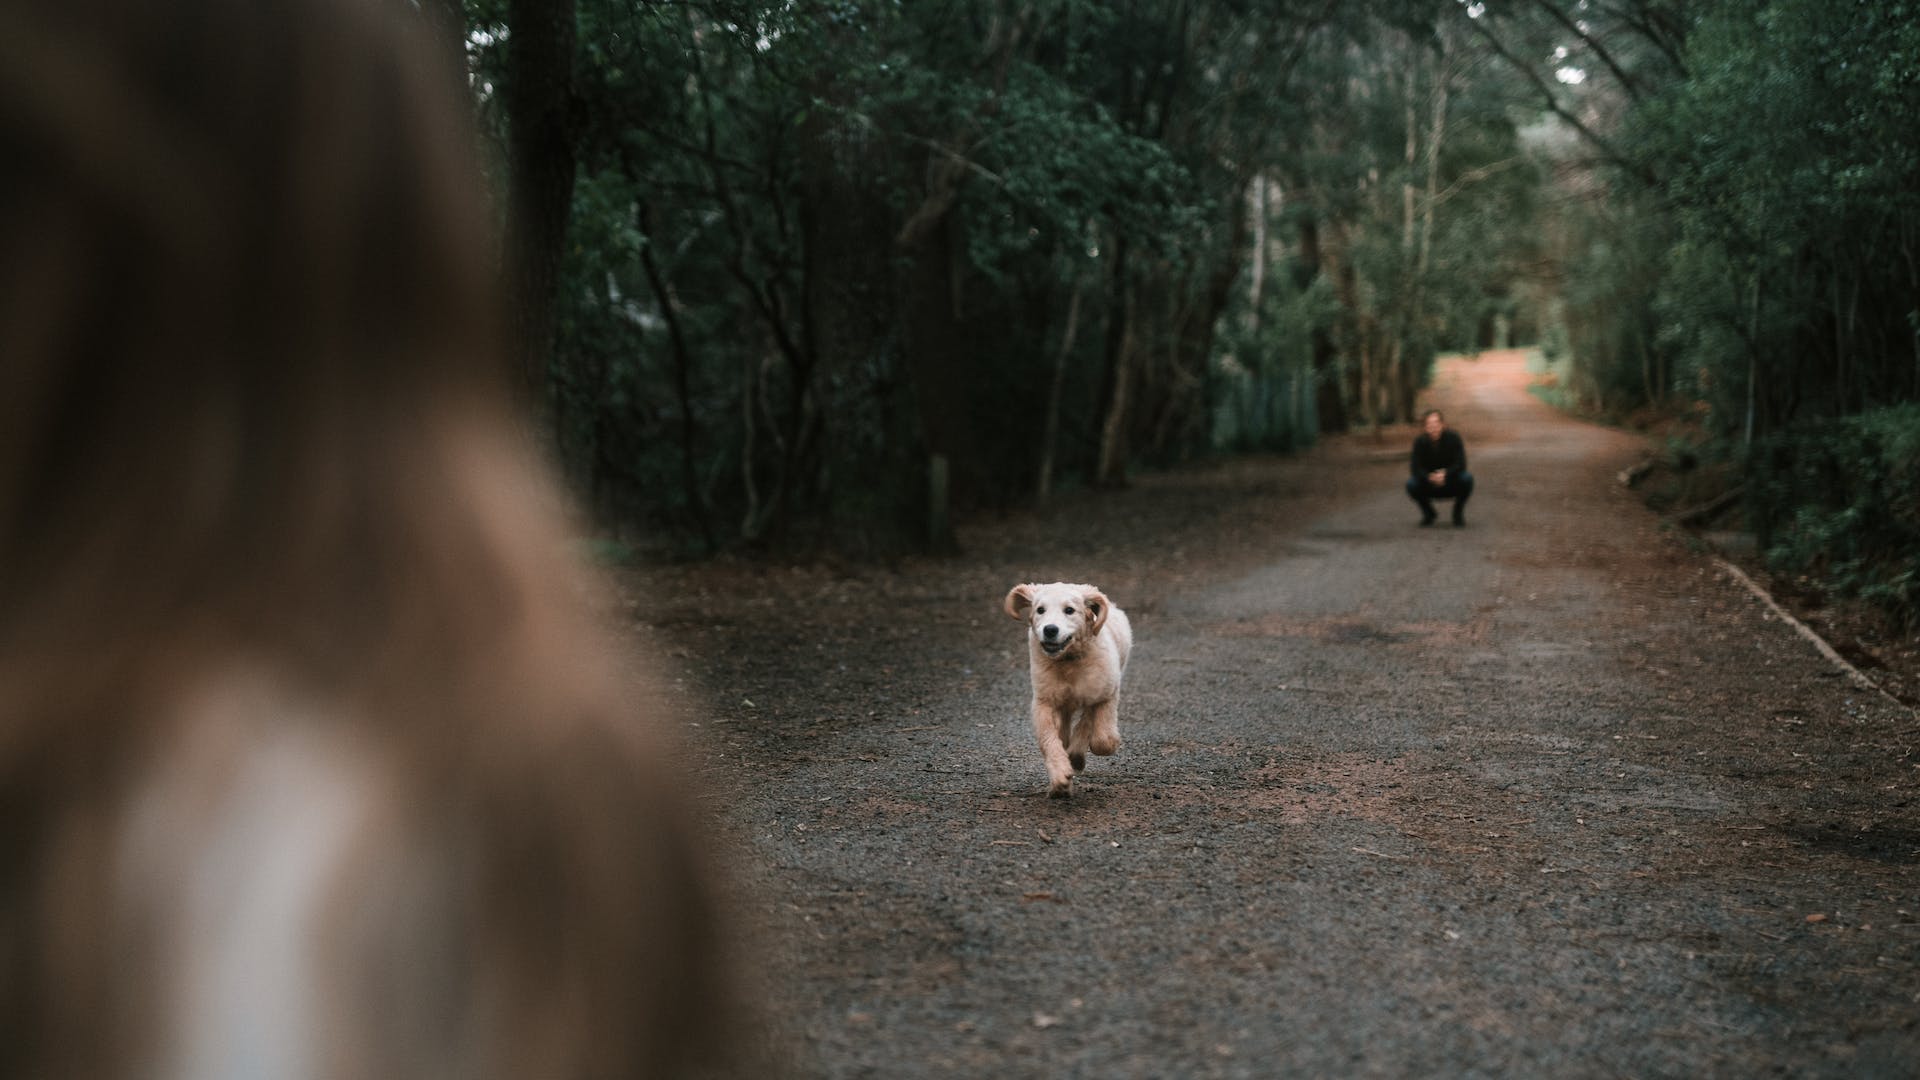 A dog running between two people in a forested area